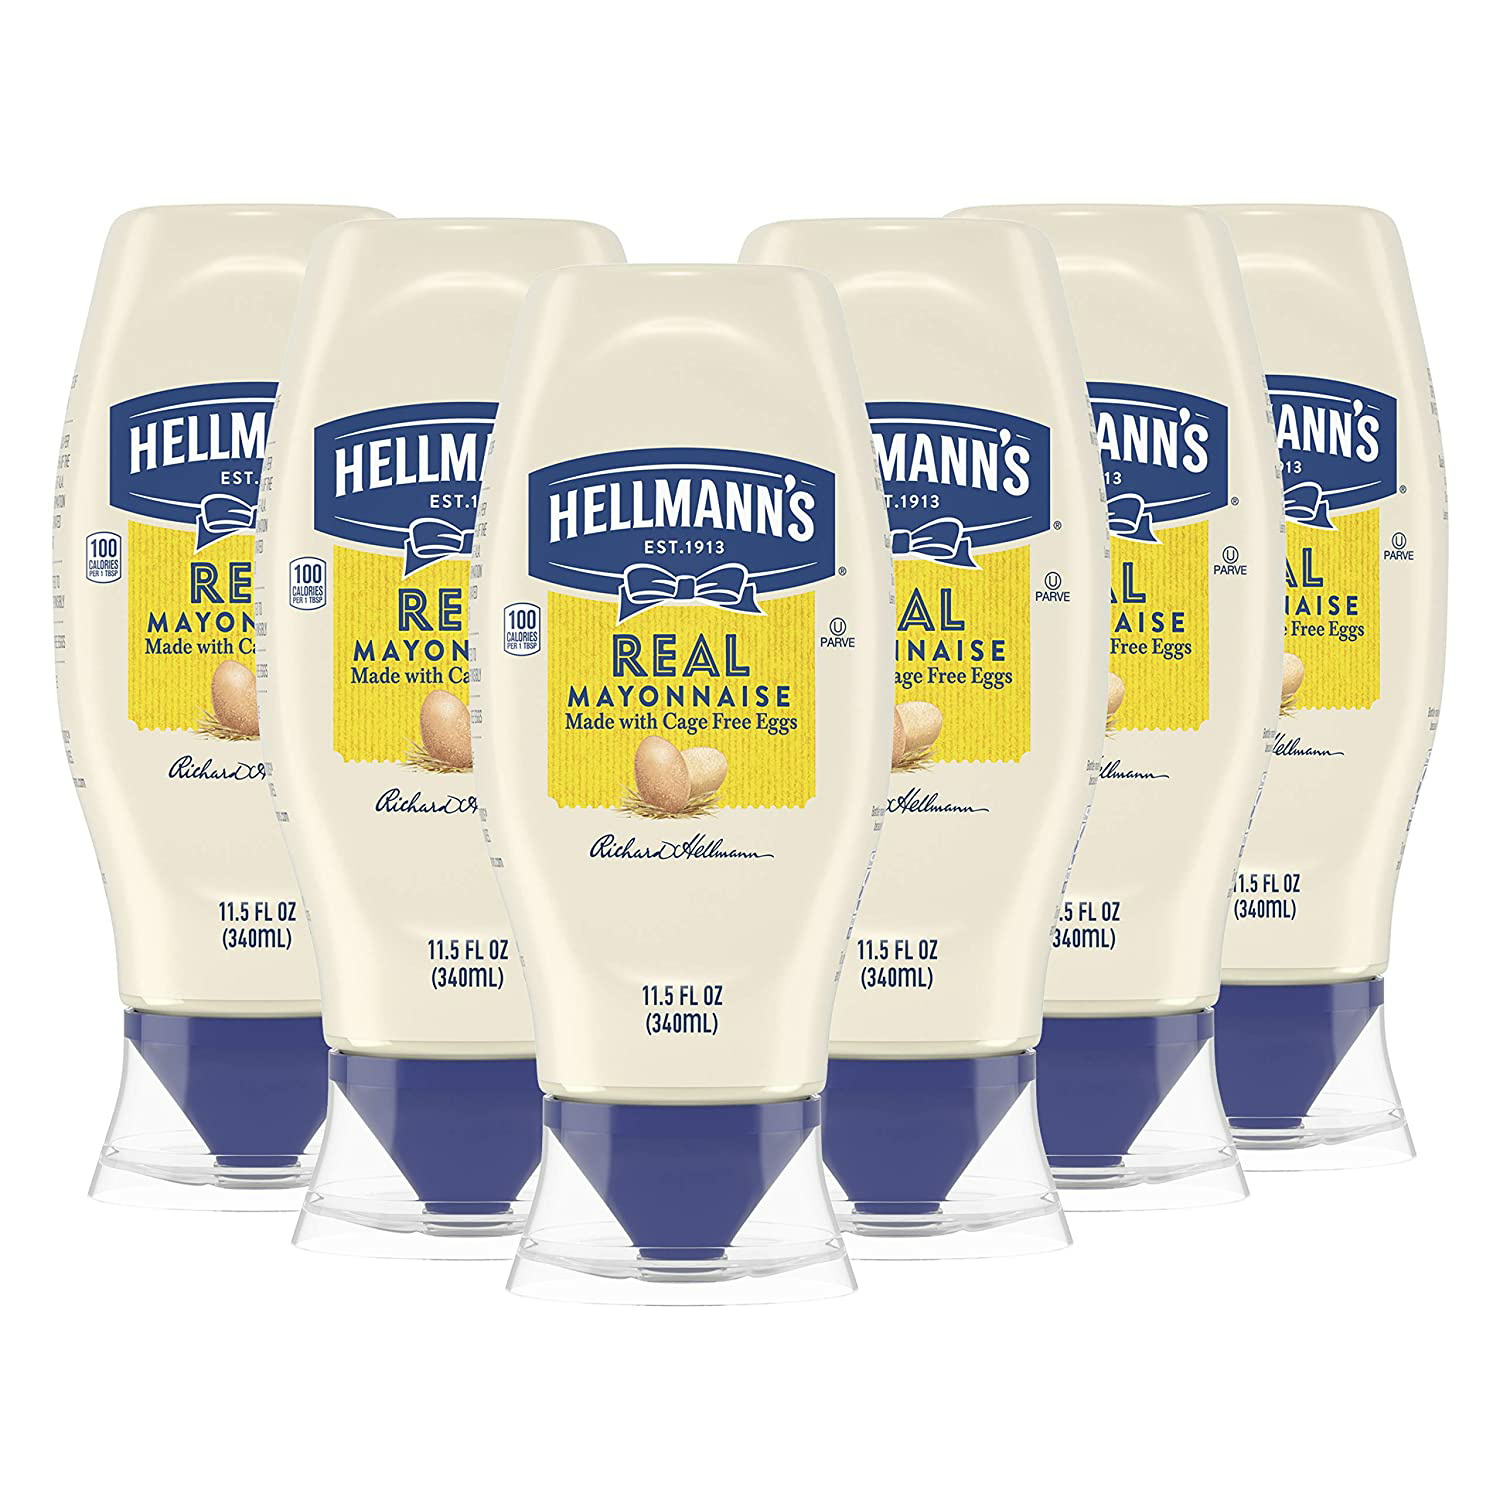 Amazon.com : Hellmann's Squeeze Real Mayonnaise 11.5 oz, Pack of 6 : Grocery & Gourmet Food $9.45